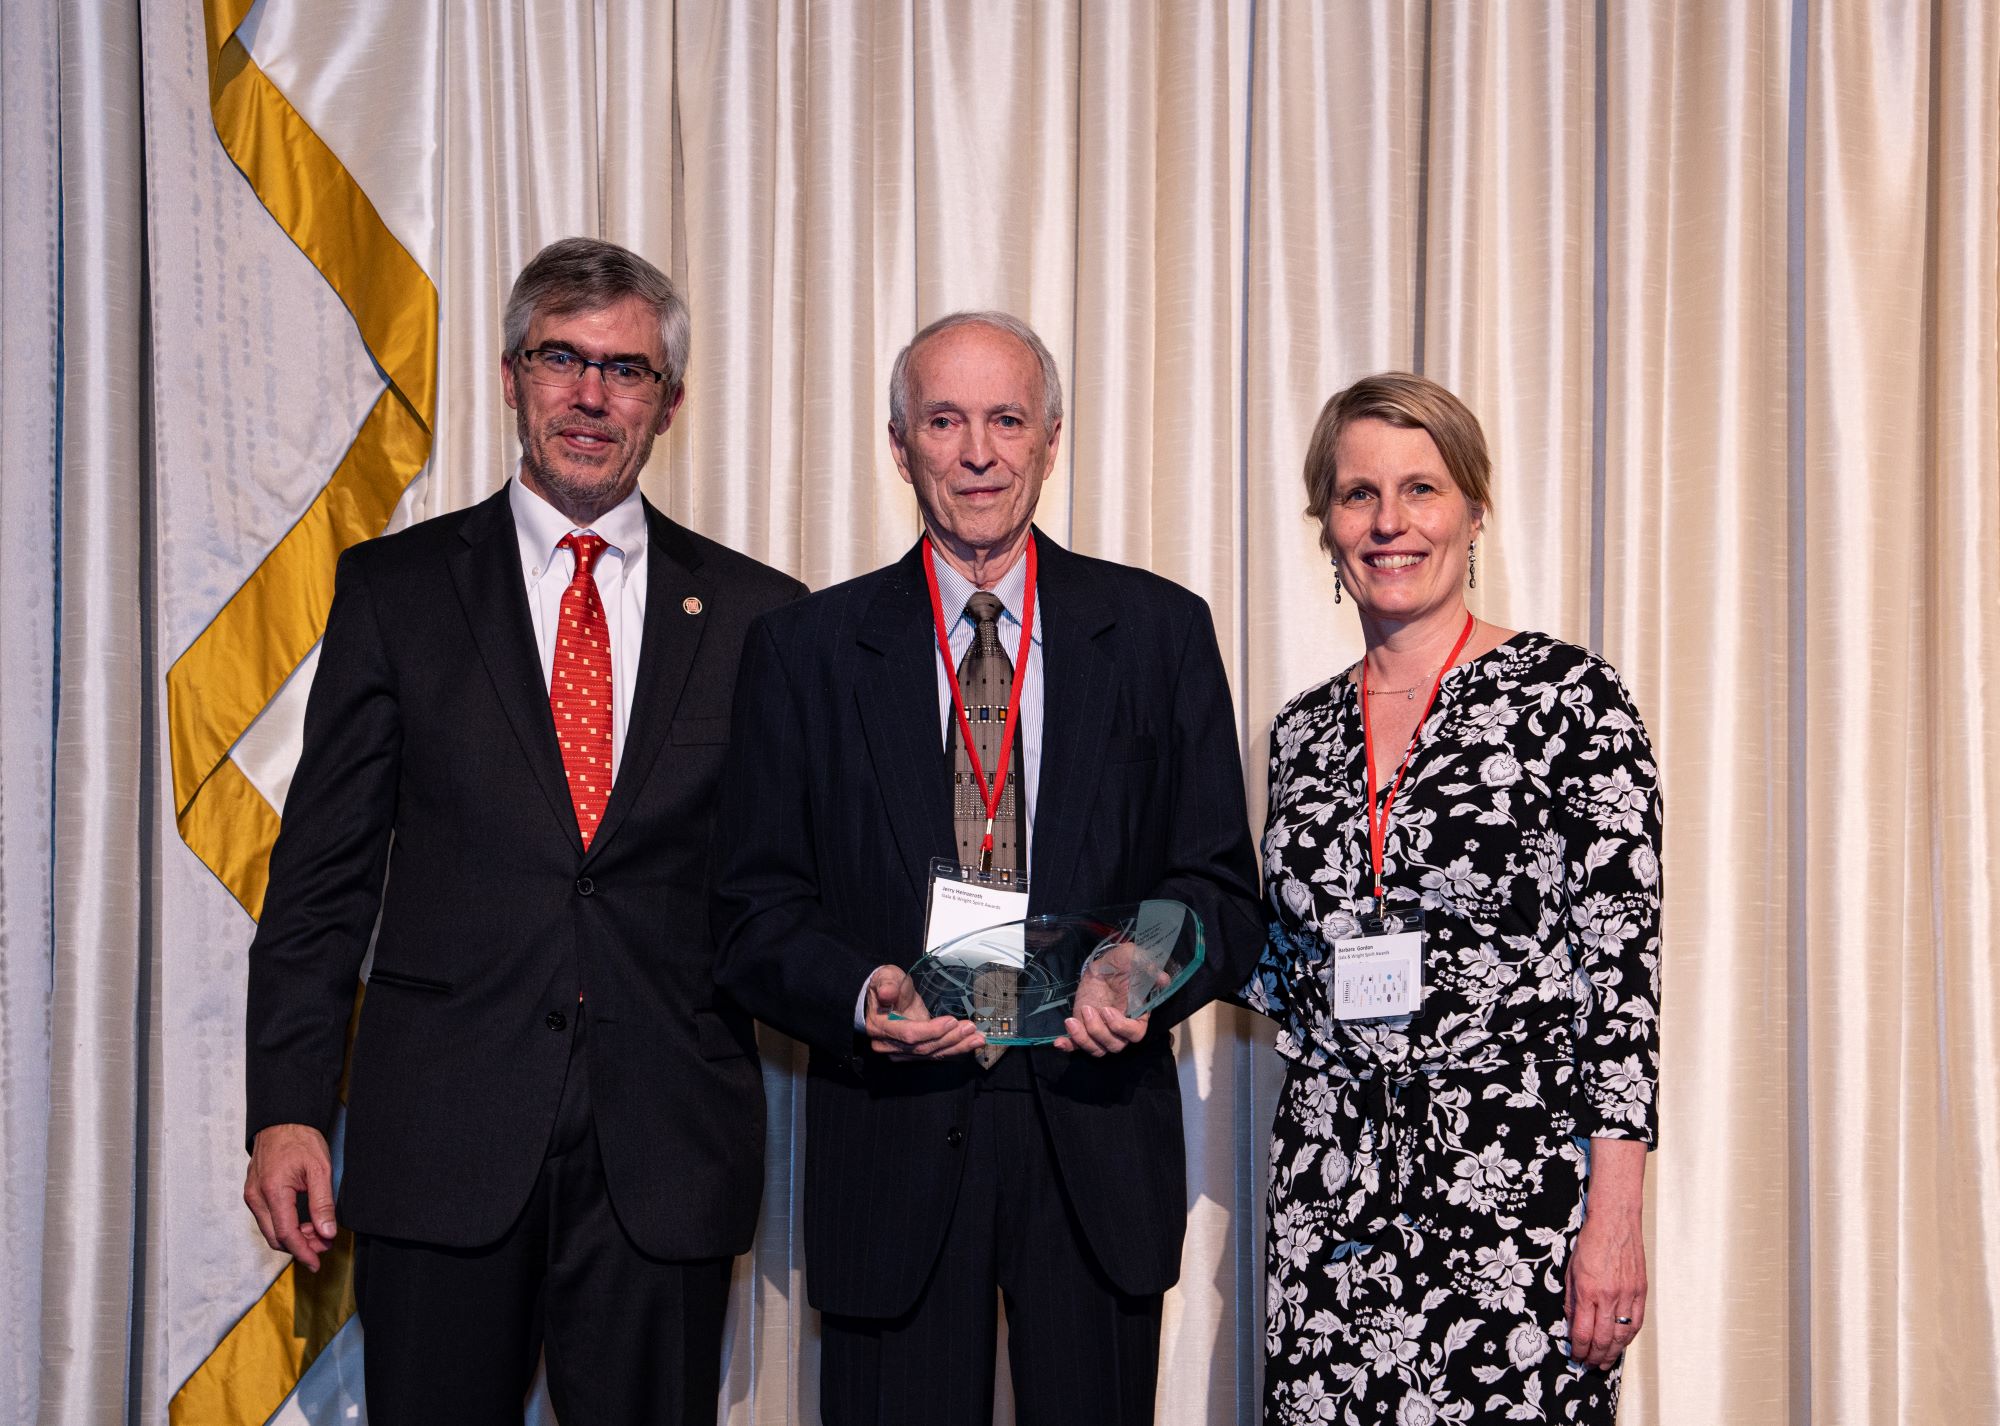 Posed photo of Frank Lloyd Wright Building Conservancy board president Chuck Henderson, Jerry Heinzeroth, and Conservancy Executive Director Barbara Gordon, with Jerry holding the Wright Spirit Award